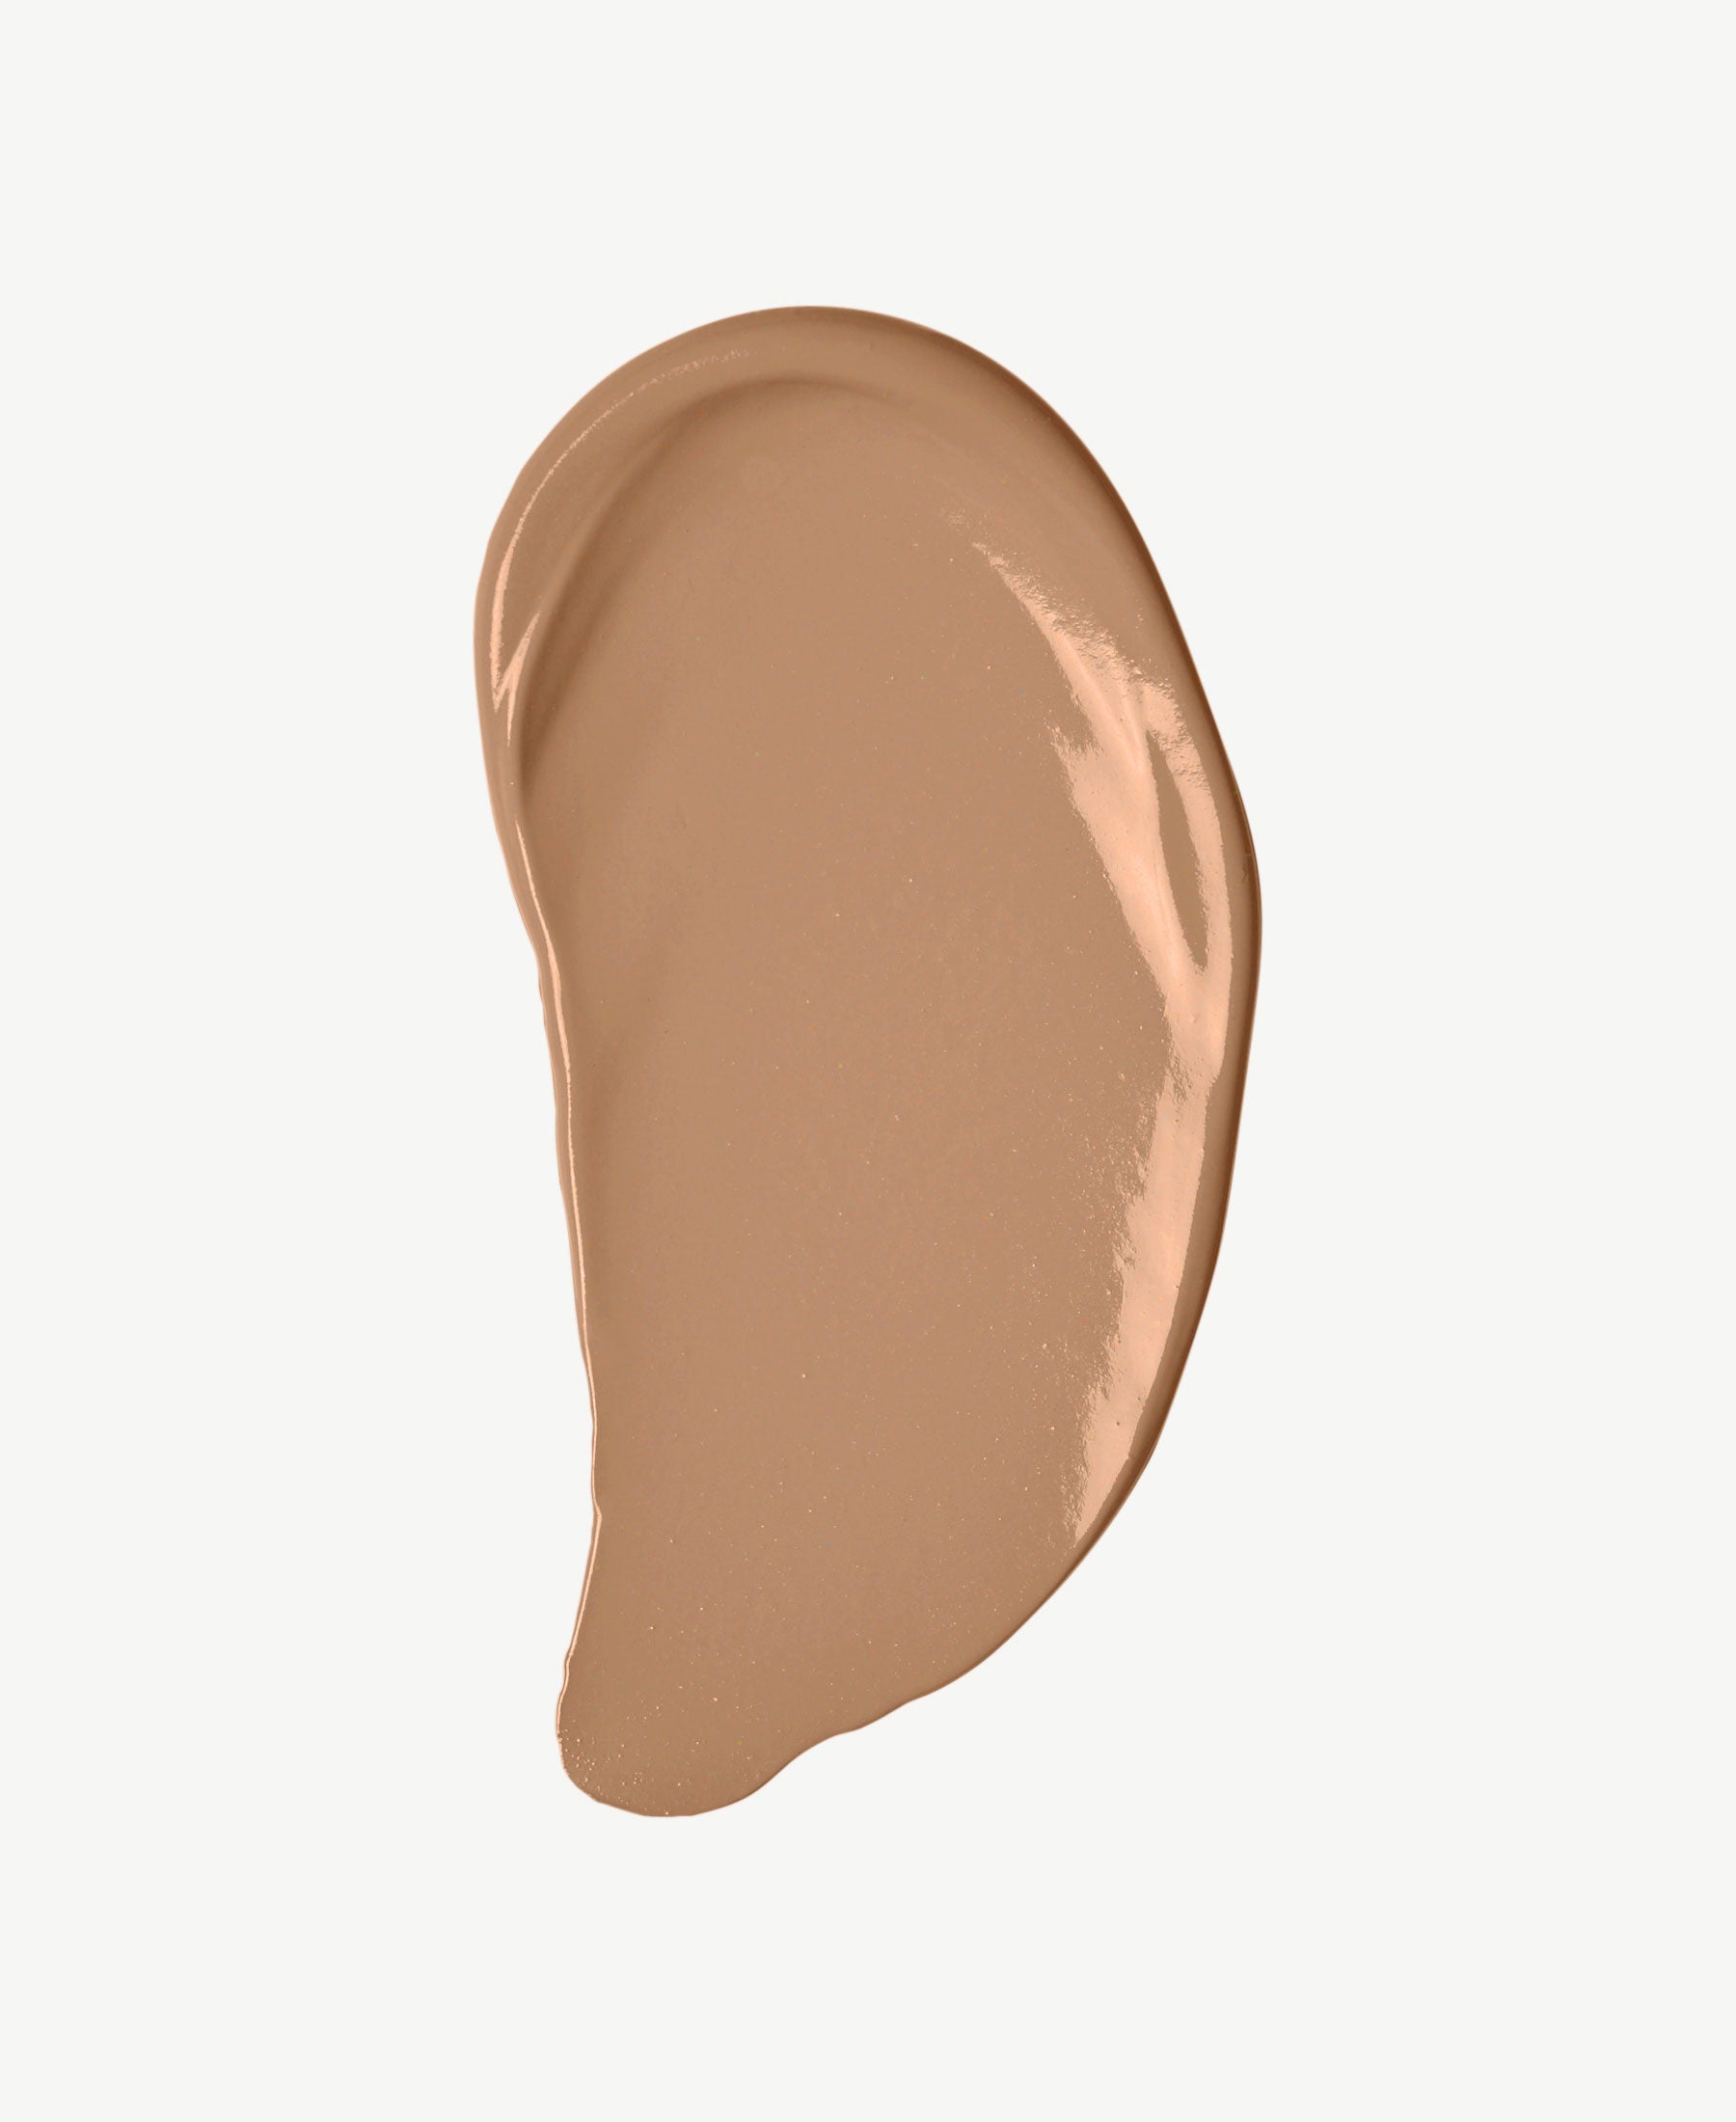 COVER FX Natural Finish Foundation